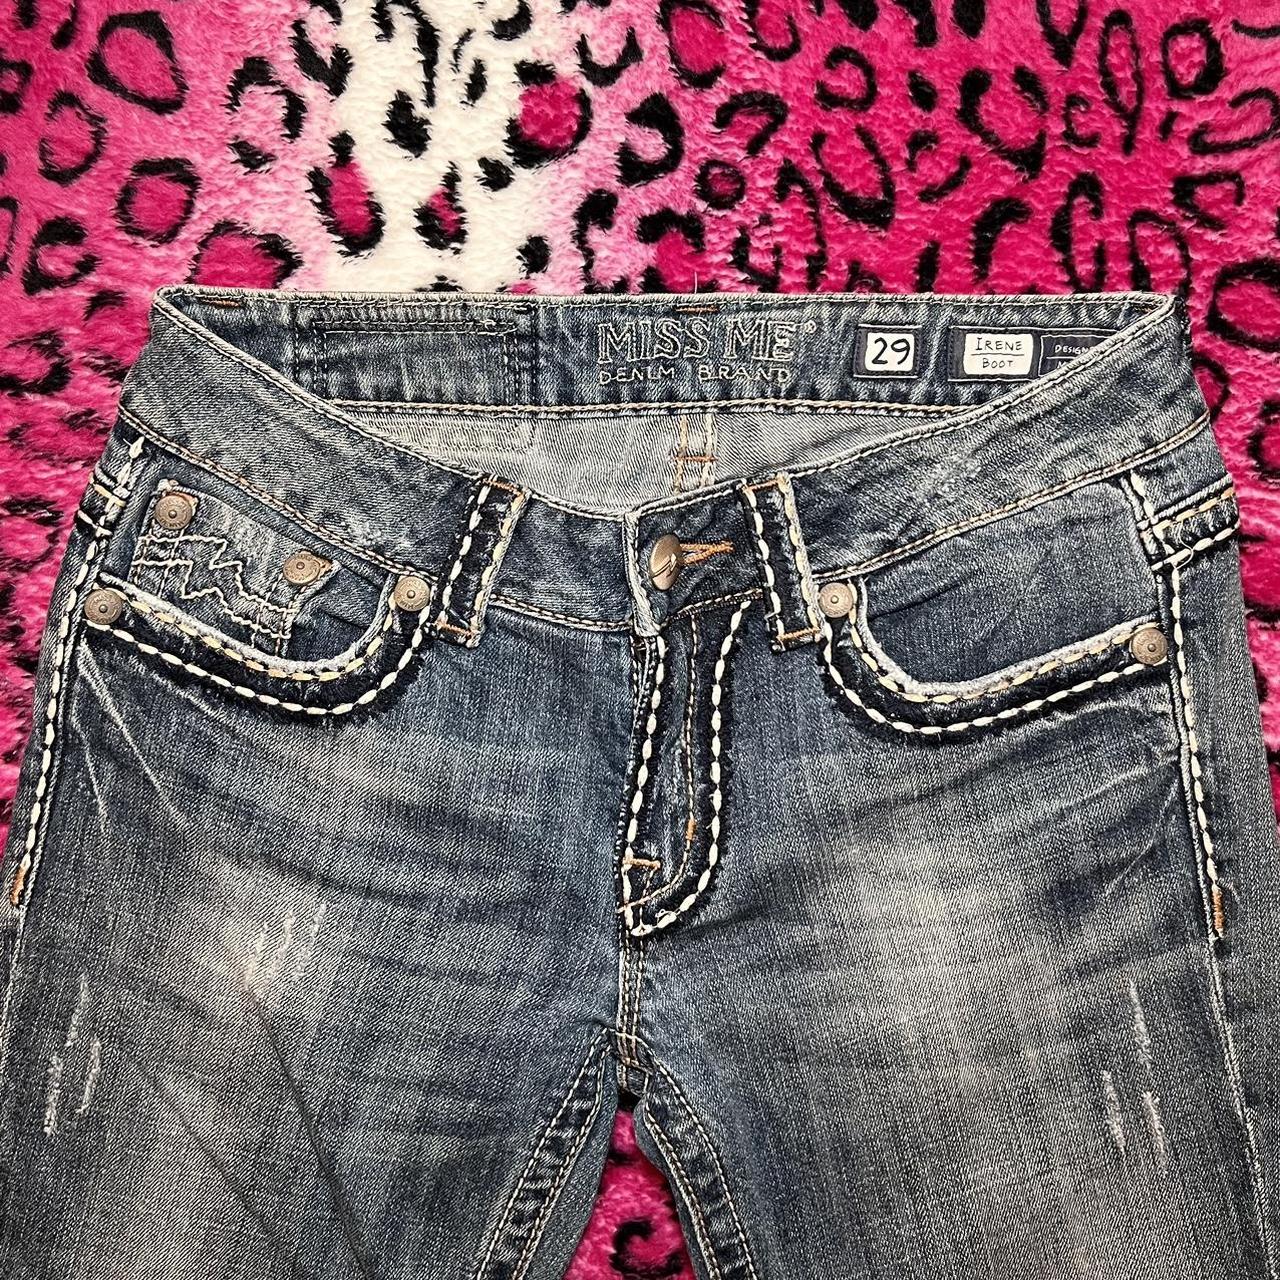 ICONIC EMBROIDERED LOWRISE MISS ME JEANS SIZE... - Depop